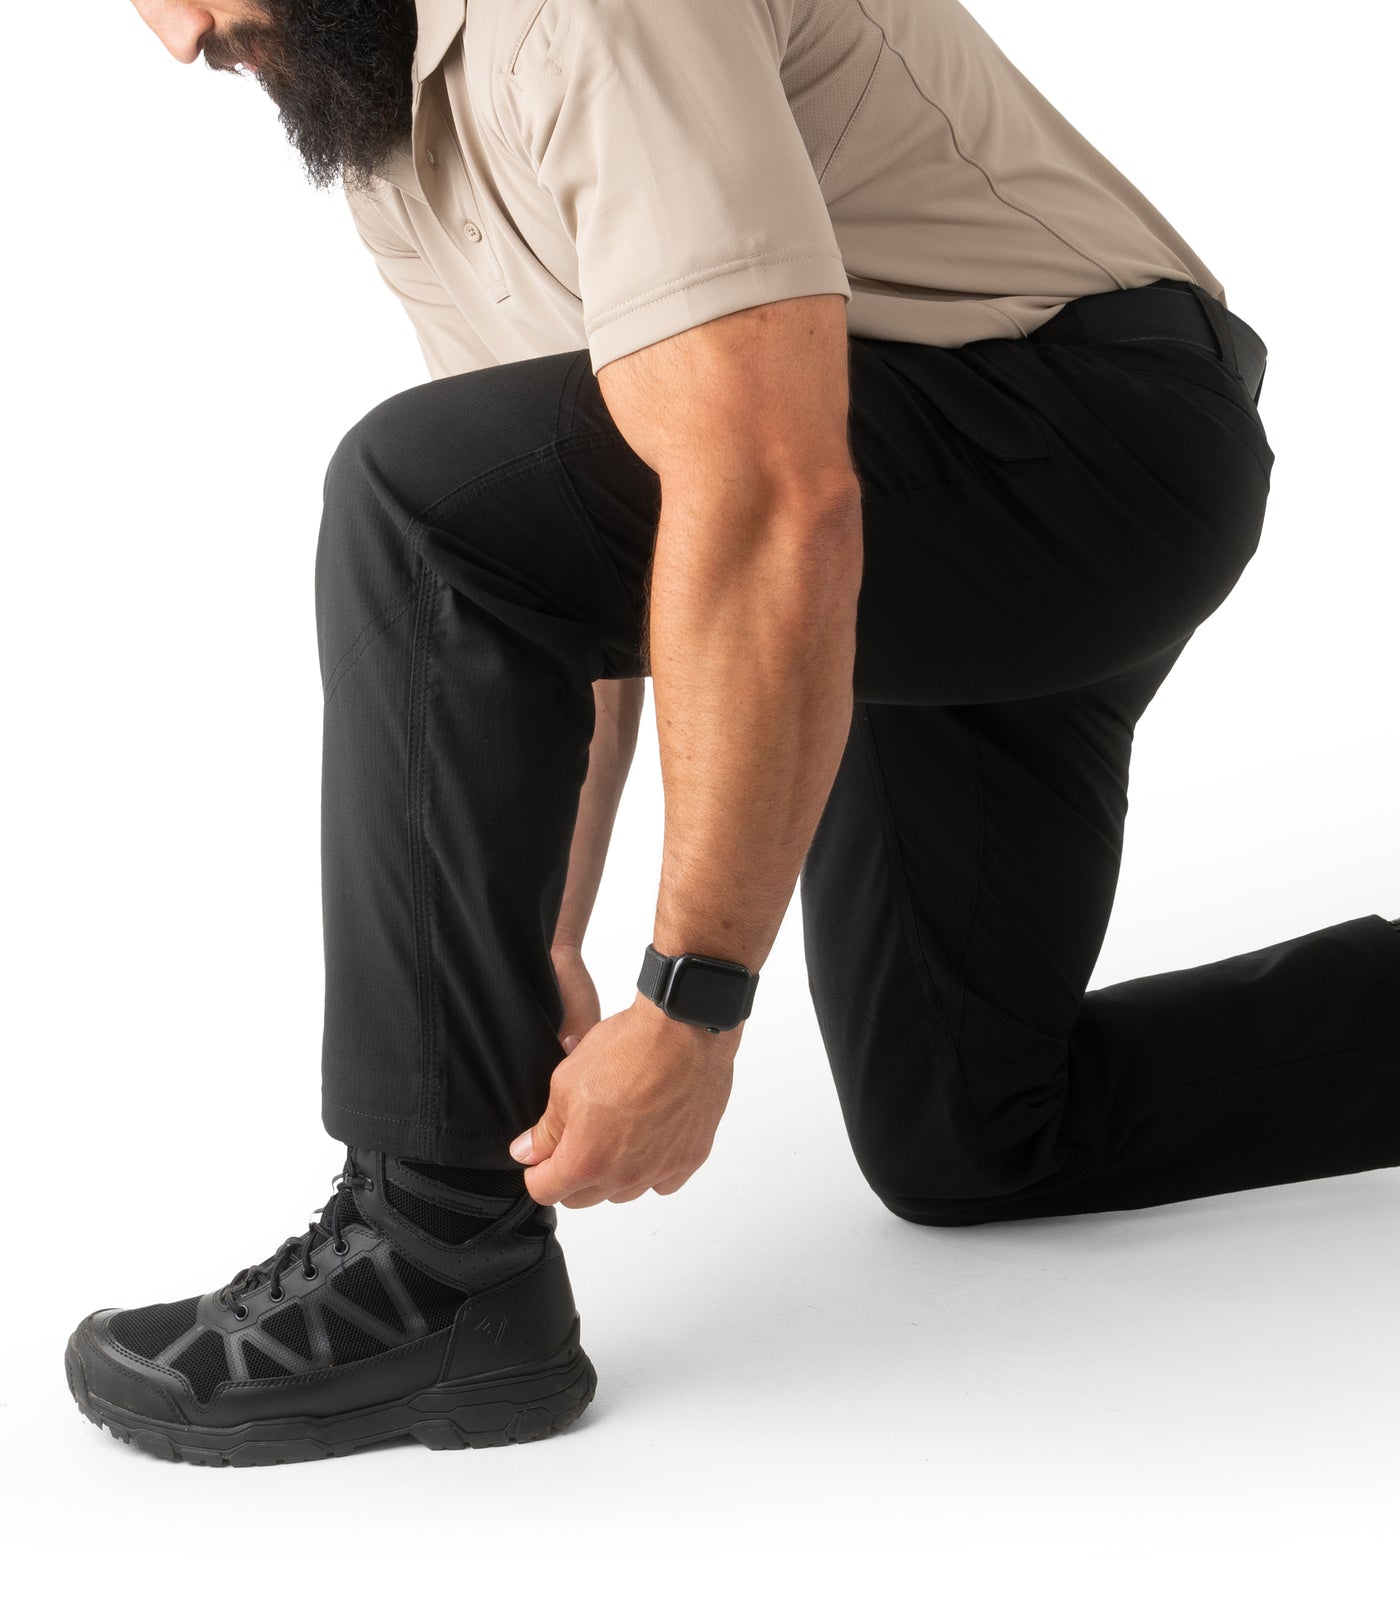 The V2 Tactical Tactical Pant – First